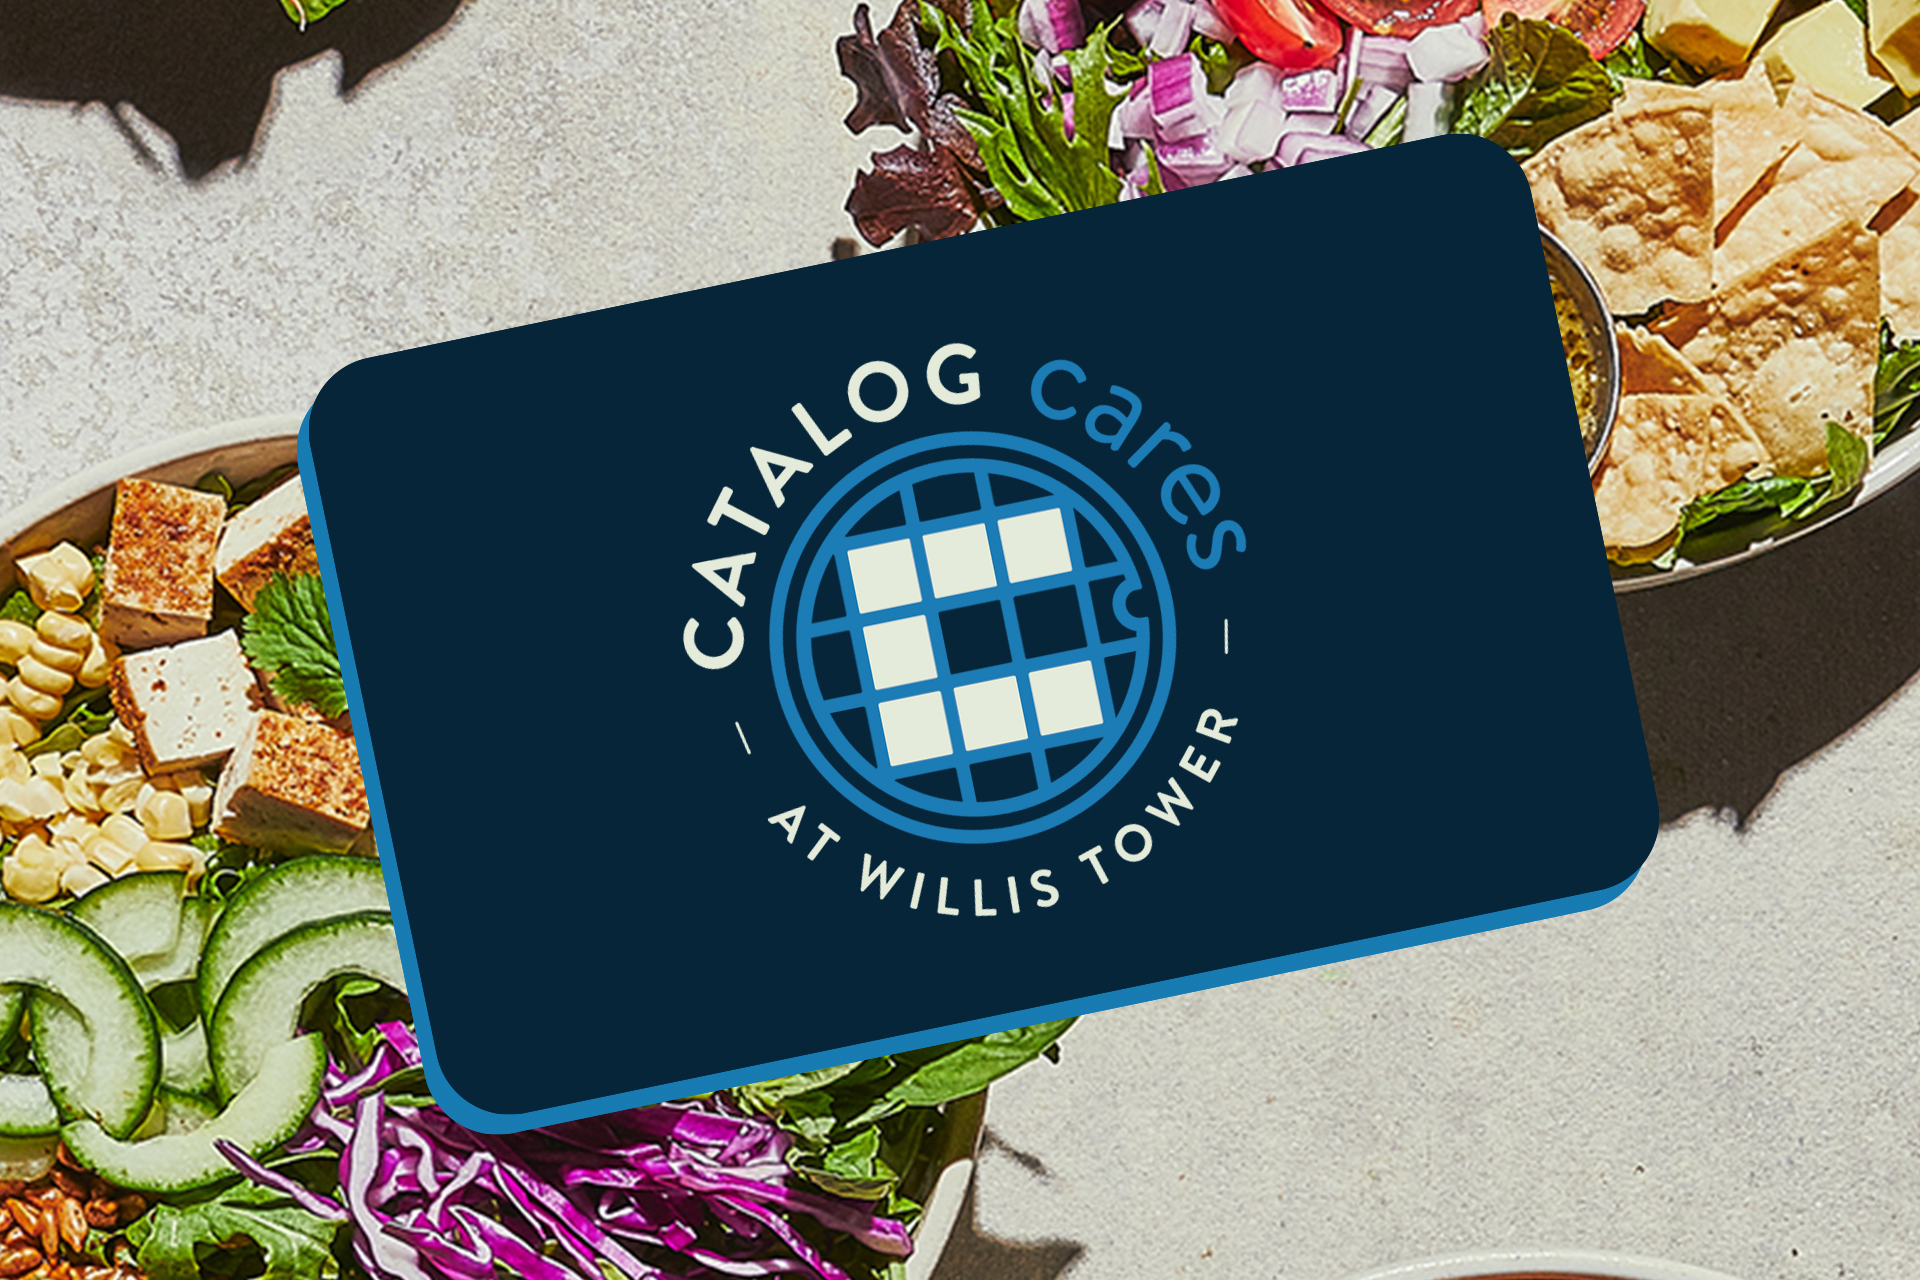 EQ Launches Catalog Cares Program at Willis Tower to Support Chicago Area Frontline Workers and Restaurants 